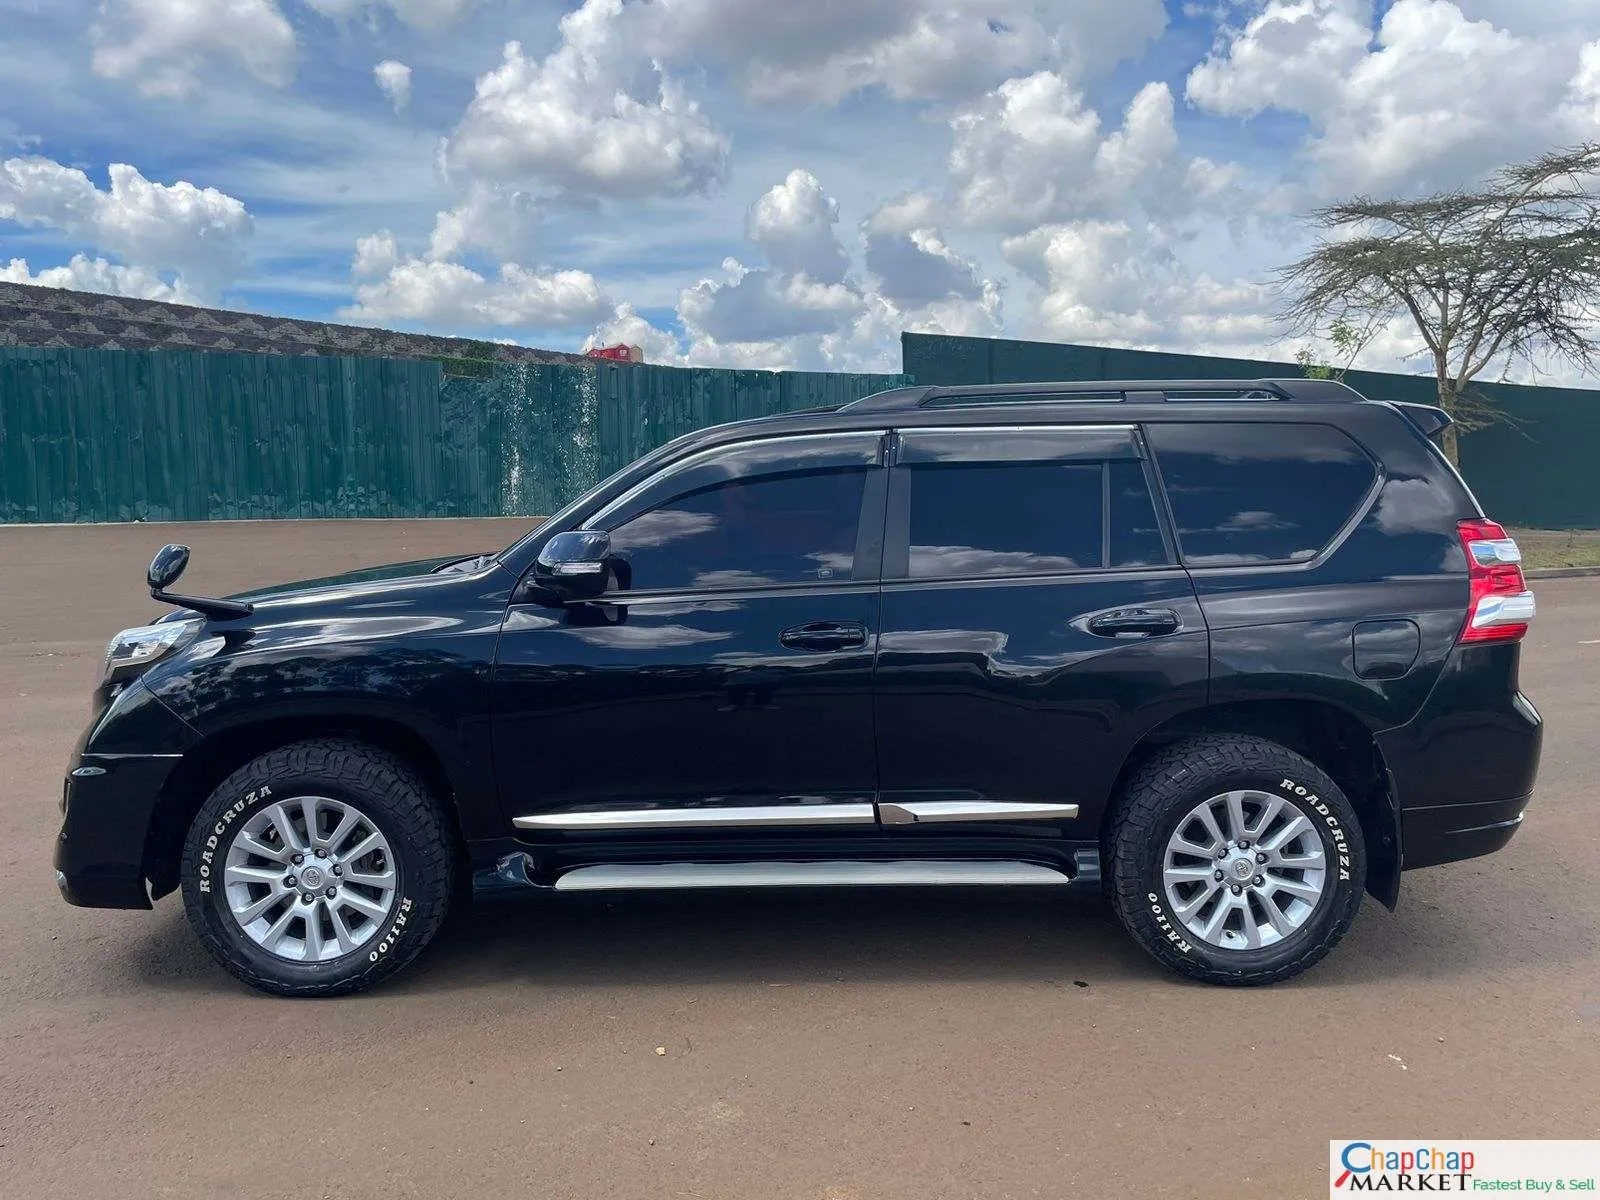 Toyota Prado TZG QUICK SALE Fully loaded trade in Ok EXCLUSIVE Toyota Prado for sale in kenya hire purchase installments